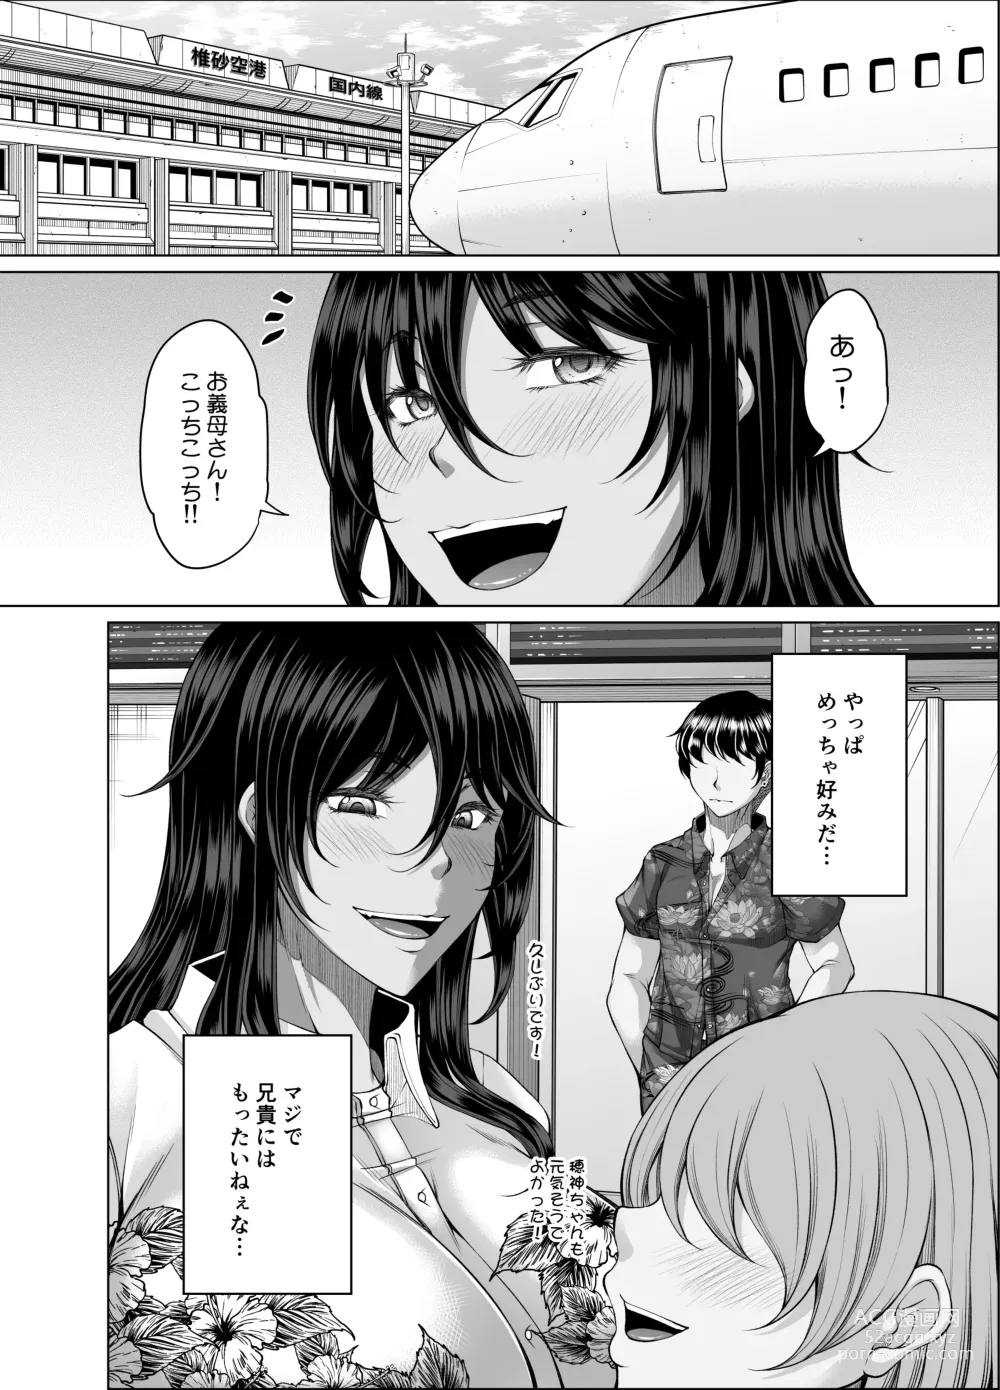 Page 5 of doujinshi 琉球勝気兄嫁は押しに弱くて欲求不満